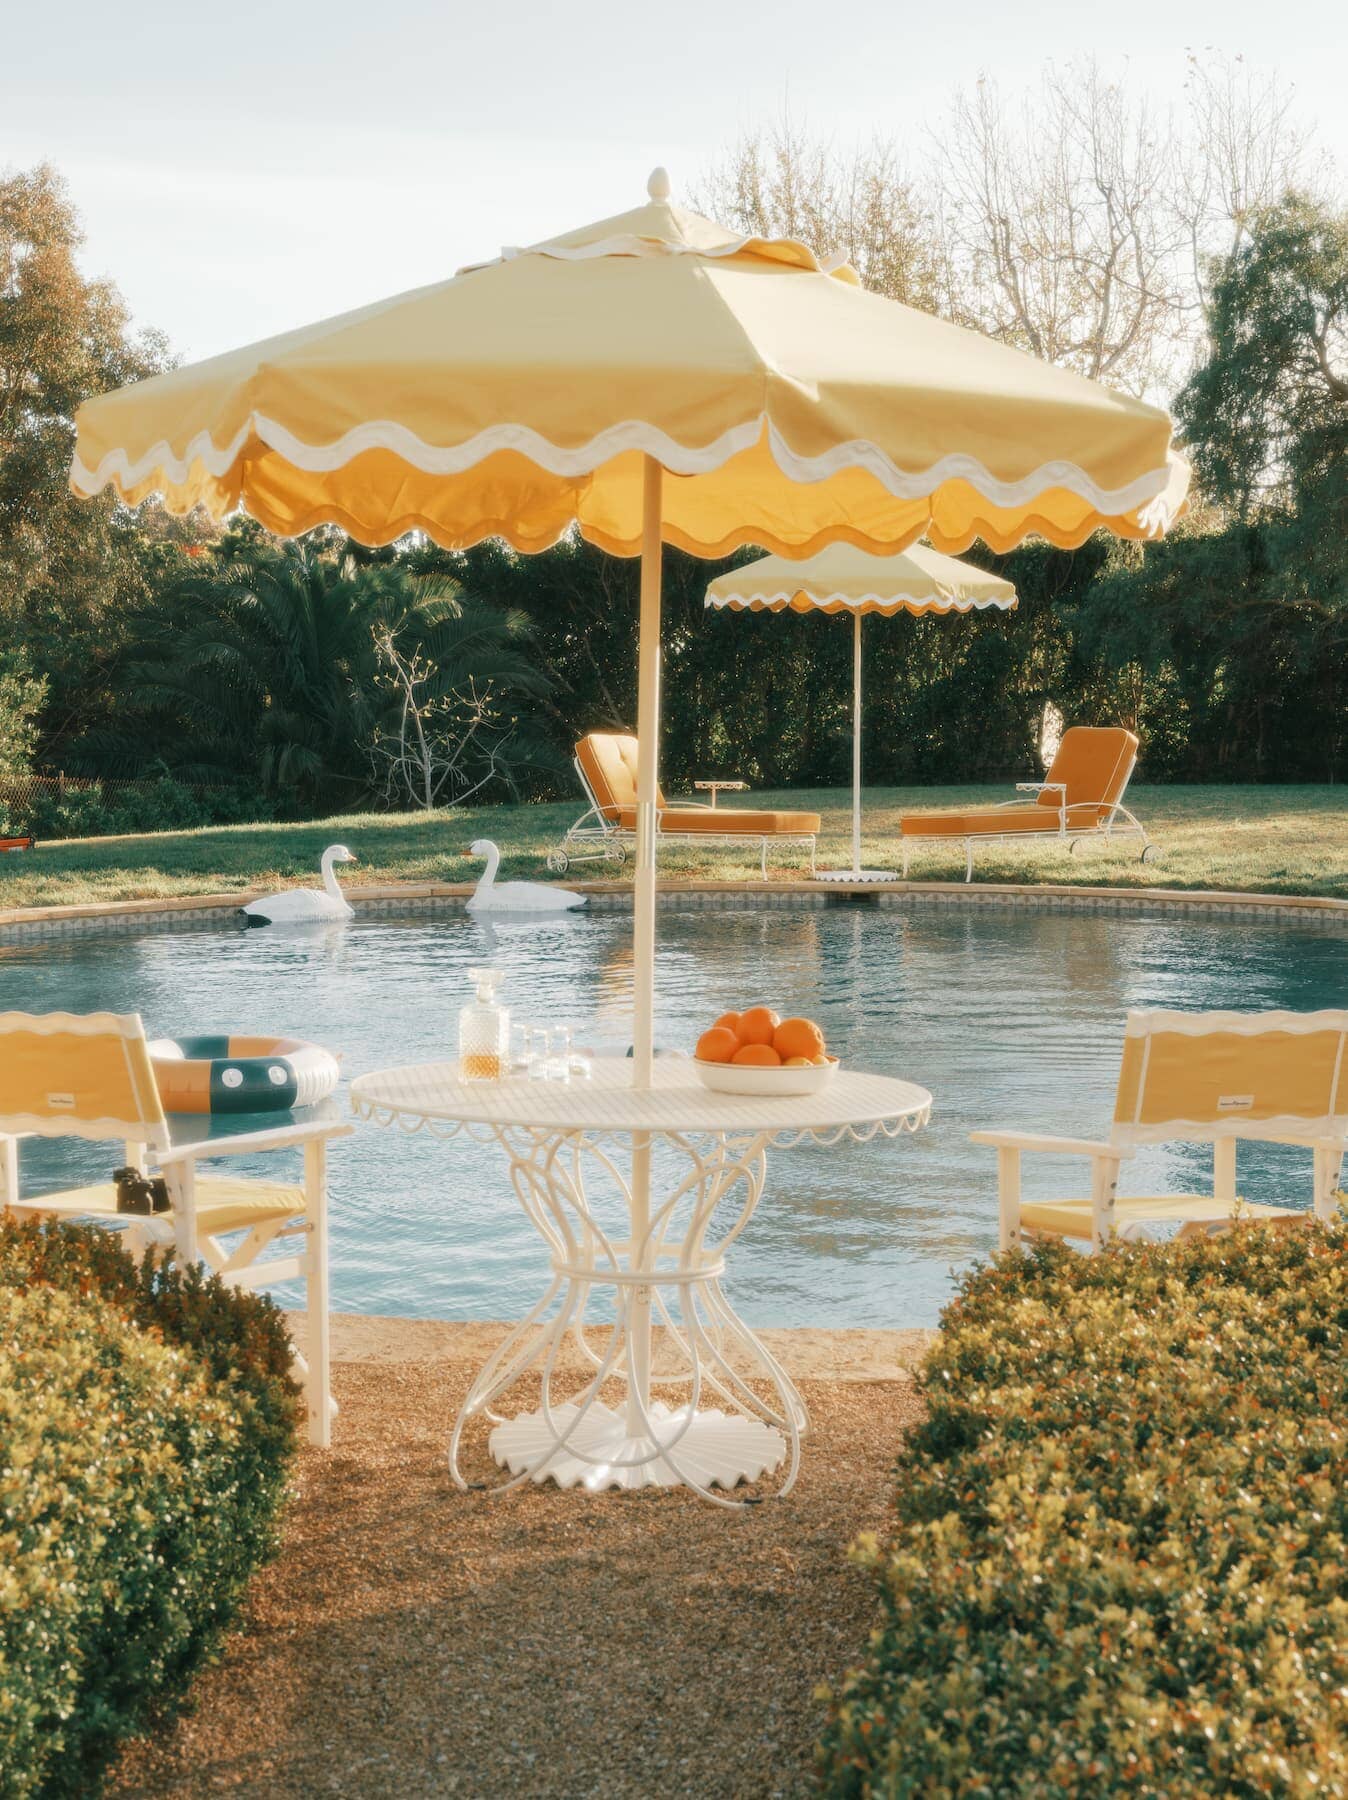 pool setting with riviera mimosa market umbrella and directors chairs